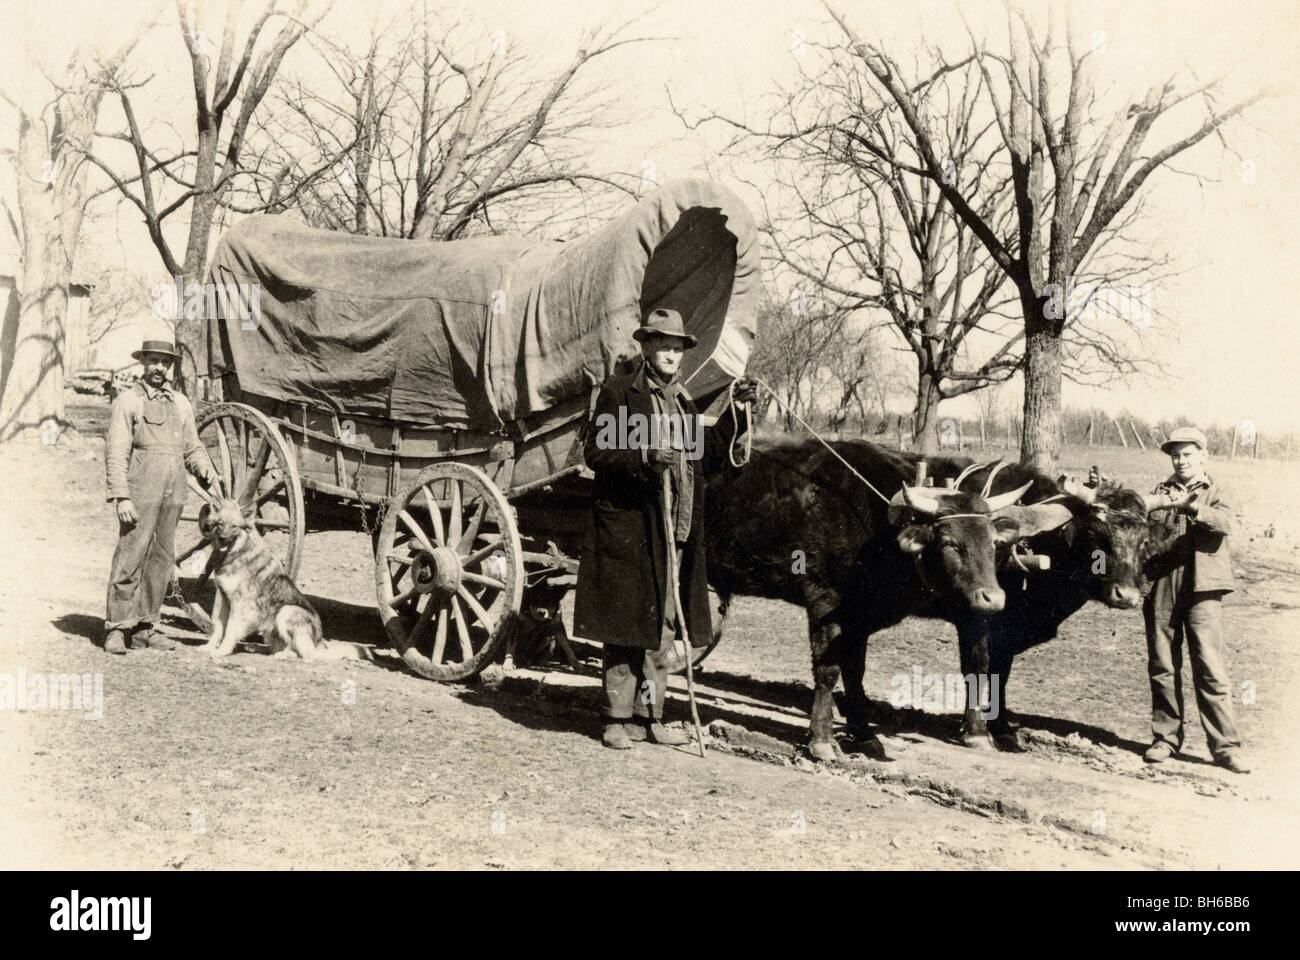 Charlie Hillman in the Ozarks with Covered Wagon Stock Photo